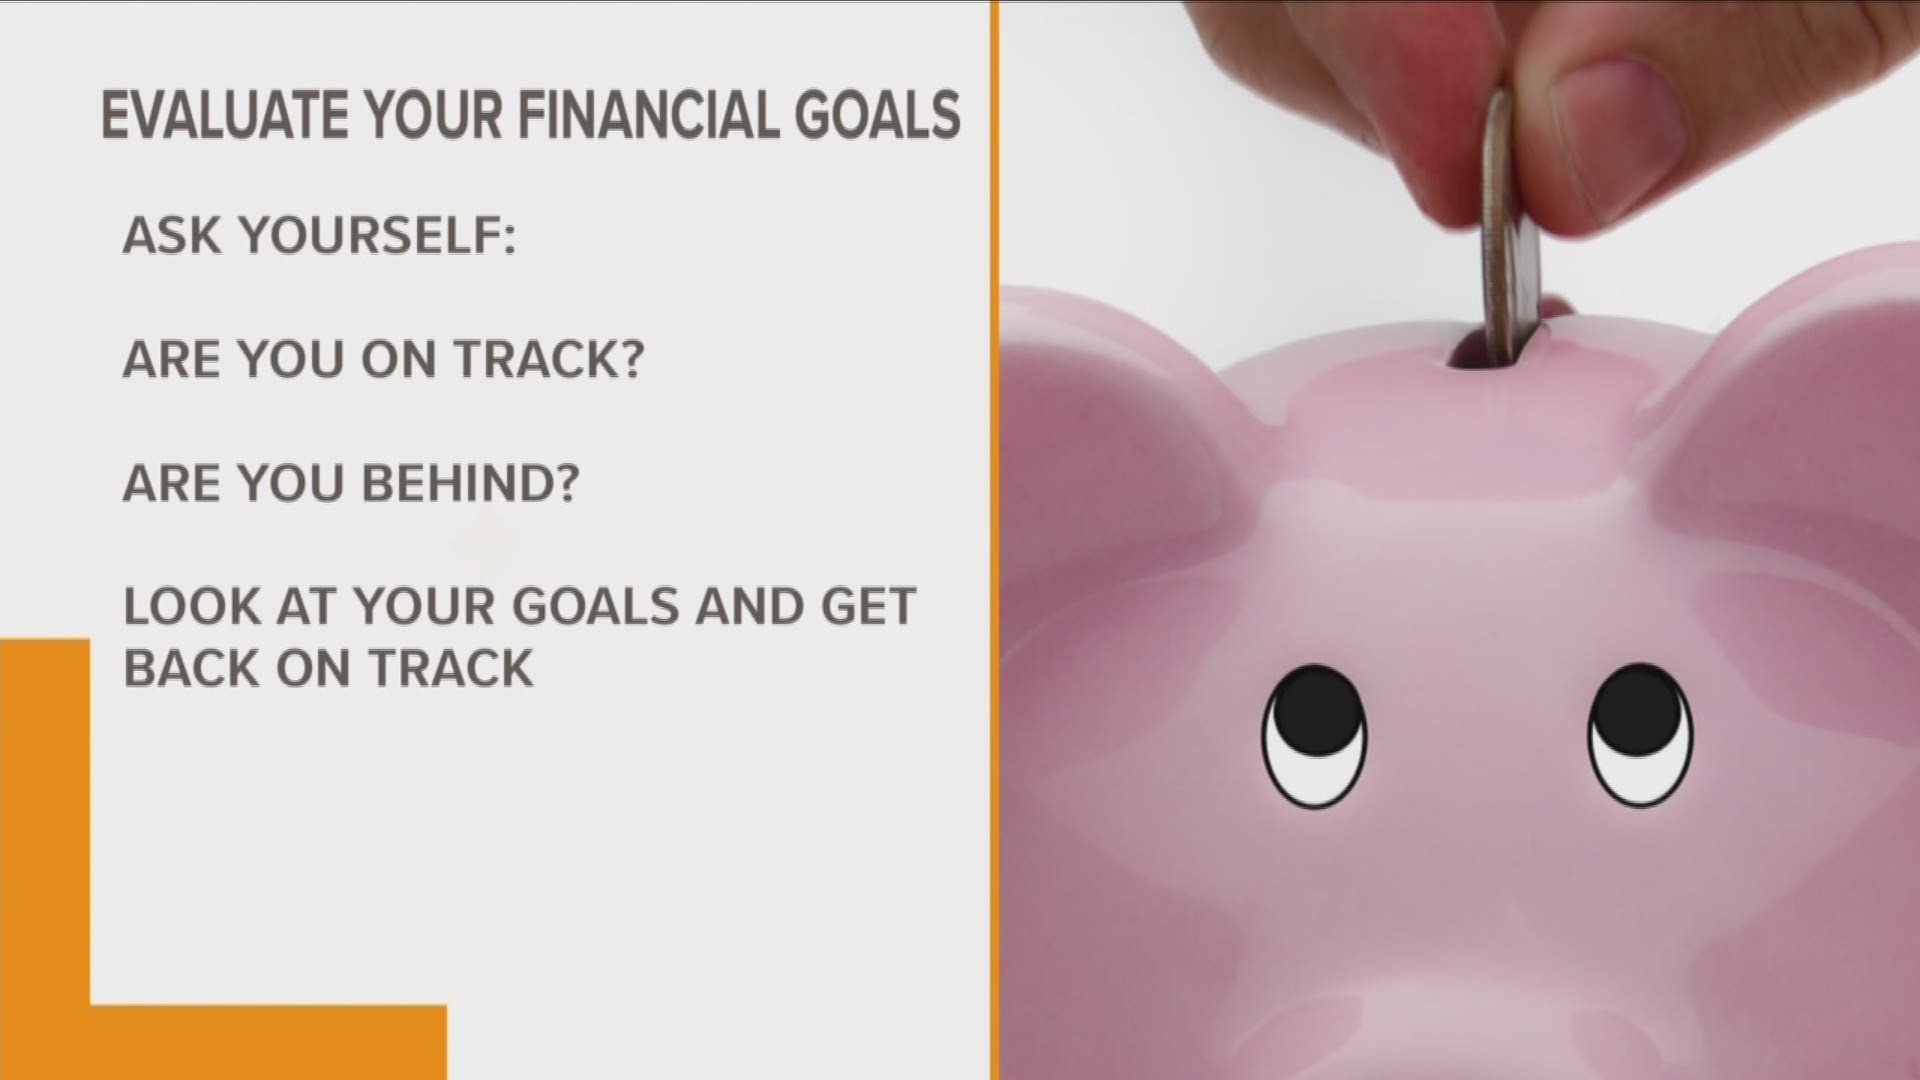 Next week will be the middle of 2019 which means half of the year is gone and it is time to focus on the second half.  If you have a financial goal to hit, this three-step checklist will help you evaluate your progress.